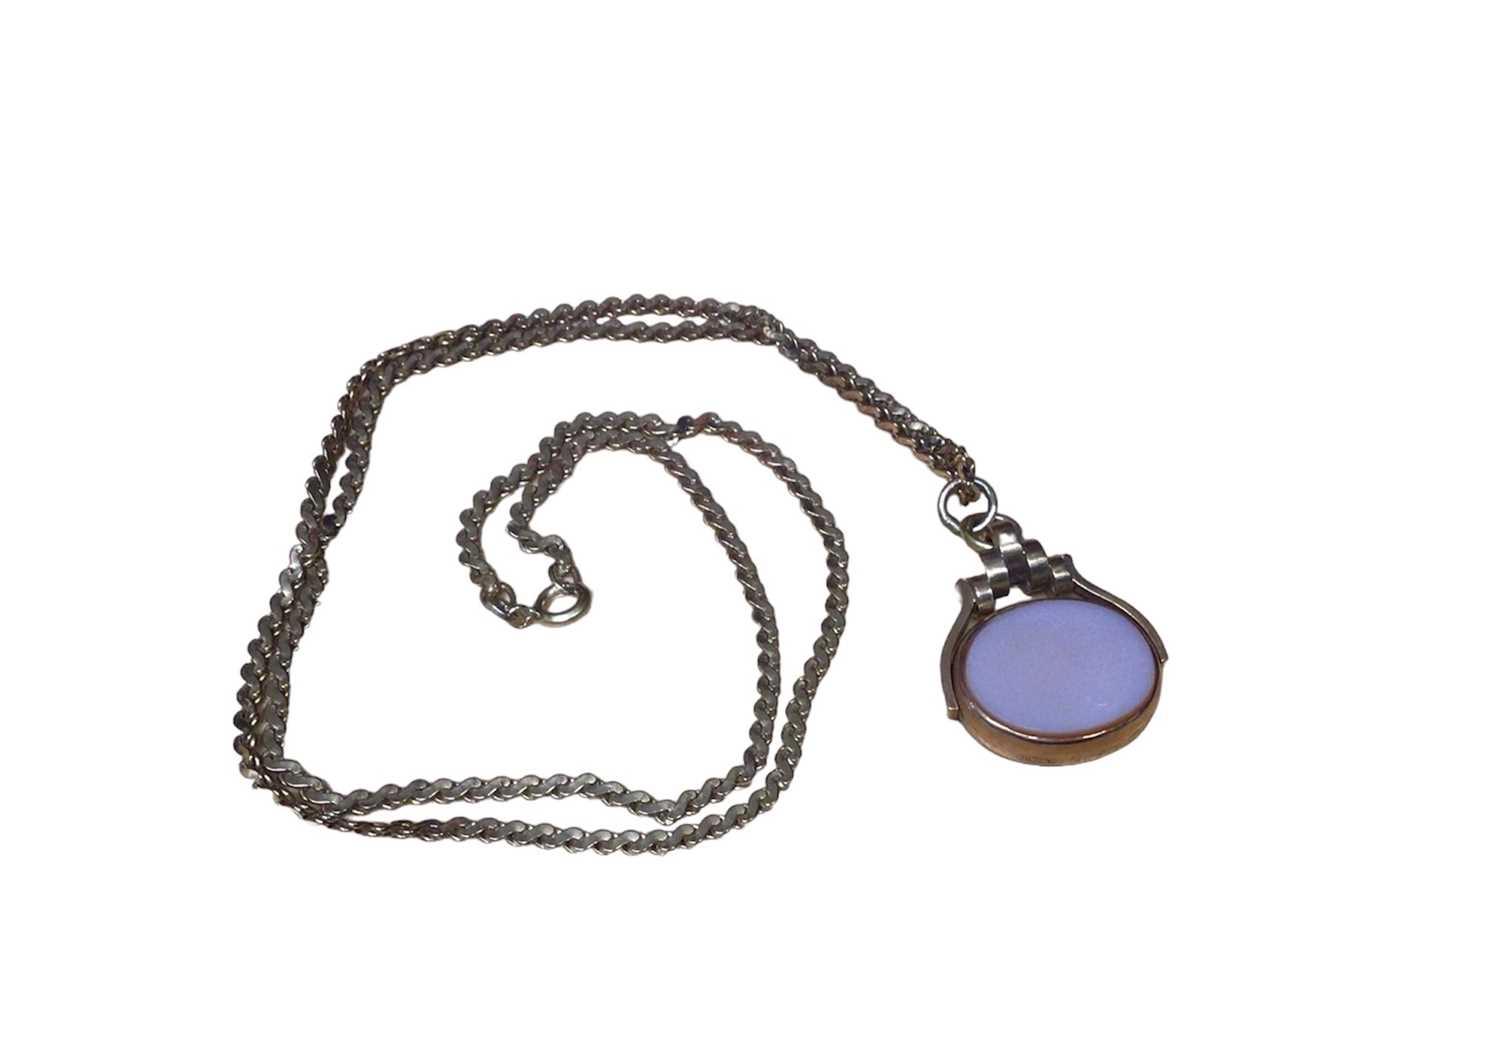 Lot 14 - Early 20th century gold mounted agate revolving fob pendant on a modern 9ct gold chain